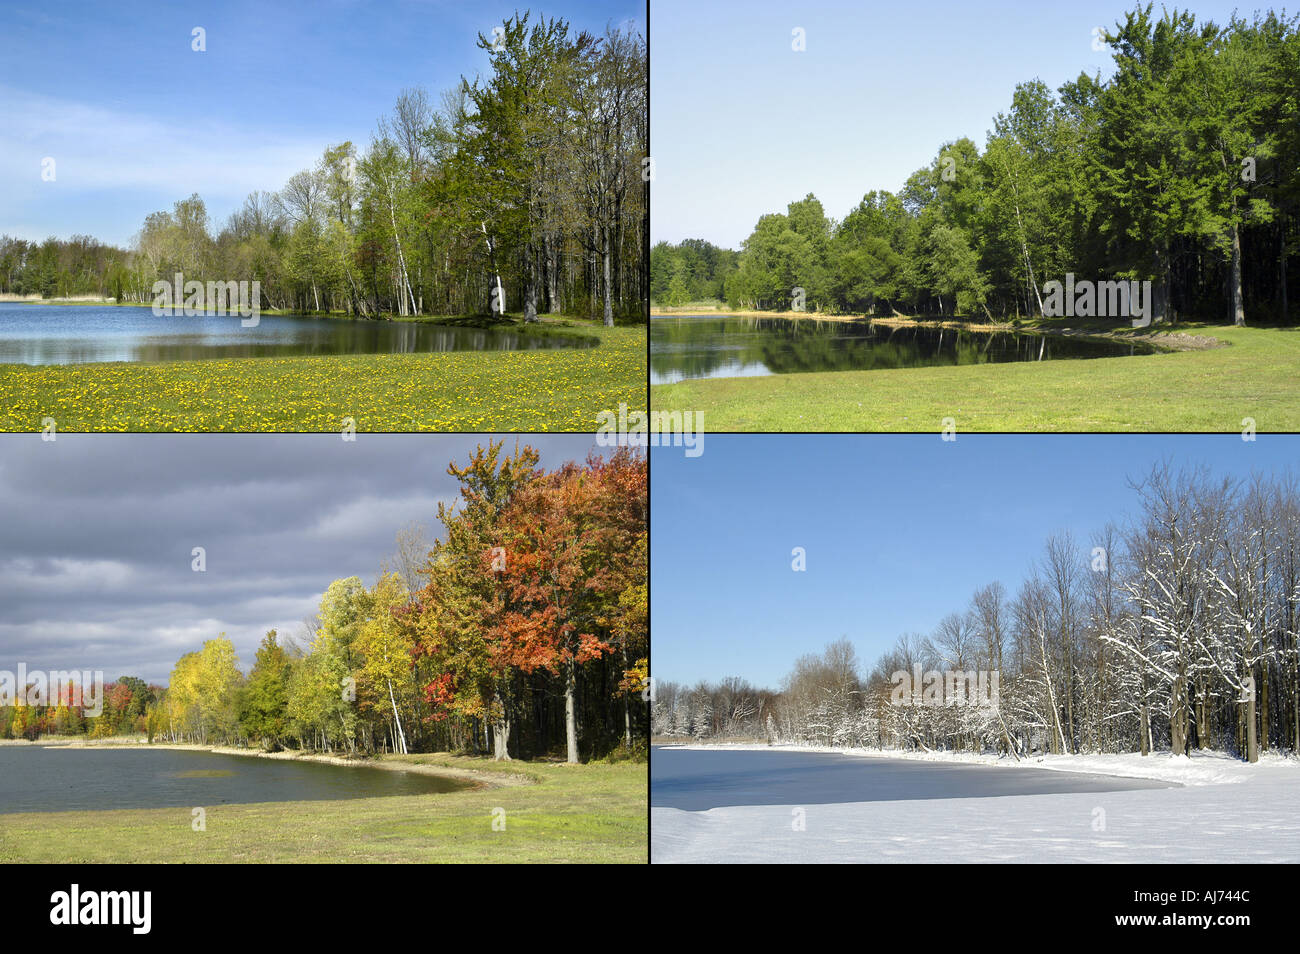 4 four  Seasons season Images -  search DENNIS MACDONALD 4 SEASONS for a COMPLETE larger selection Stock Photo